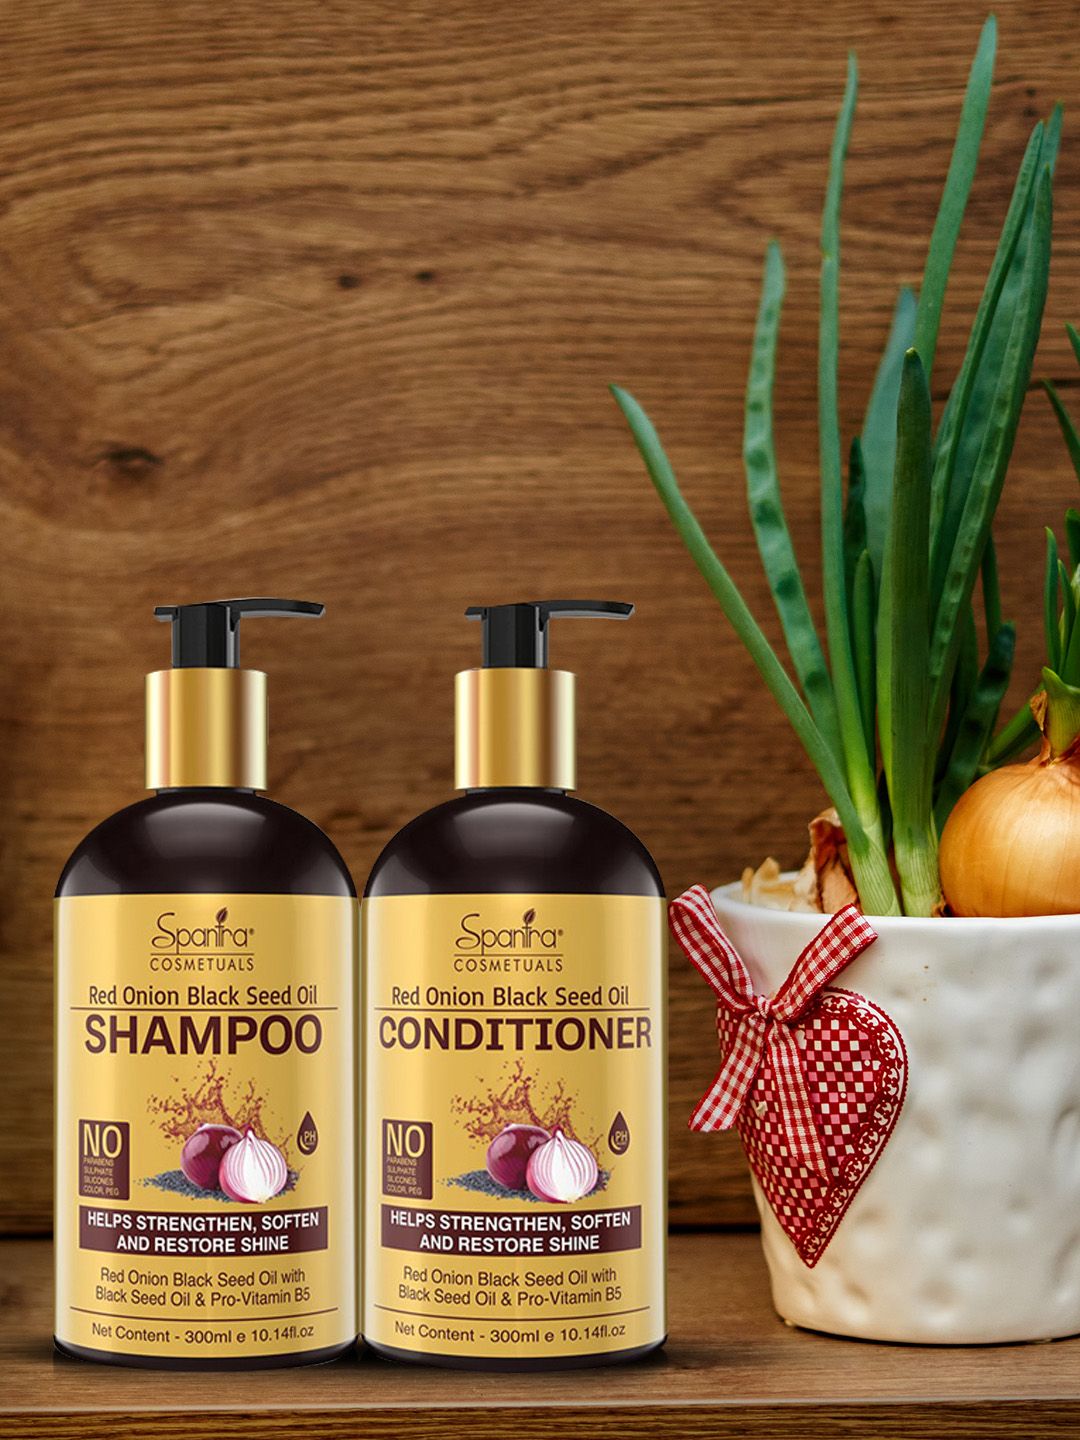 Spantra Red Onion Black Seed Oil Infused Shampoo & Conditioner with Hair Mask Price in India